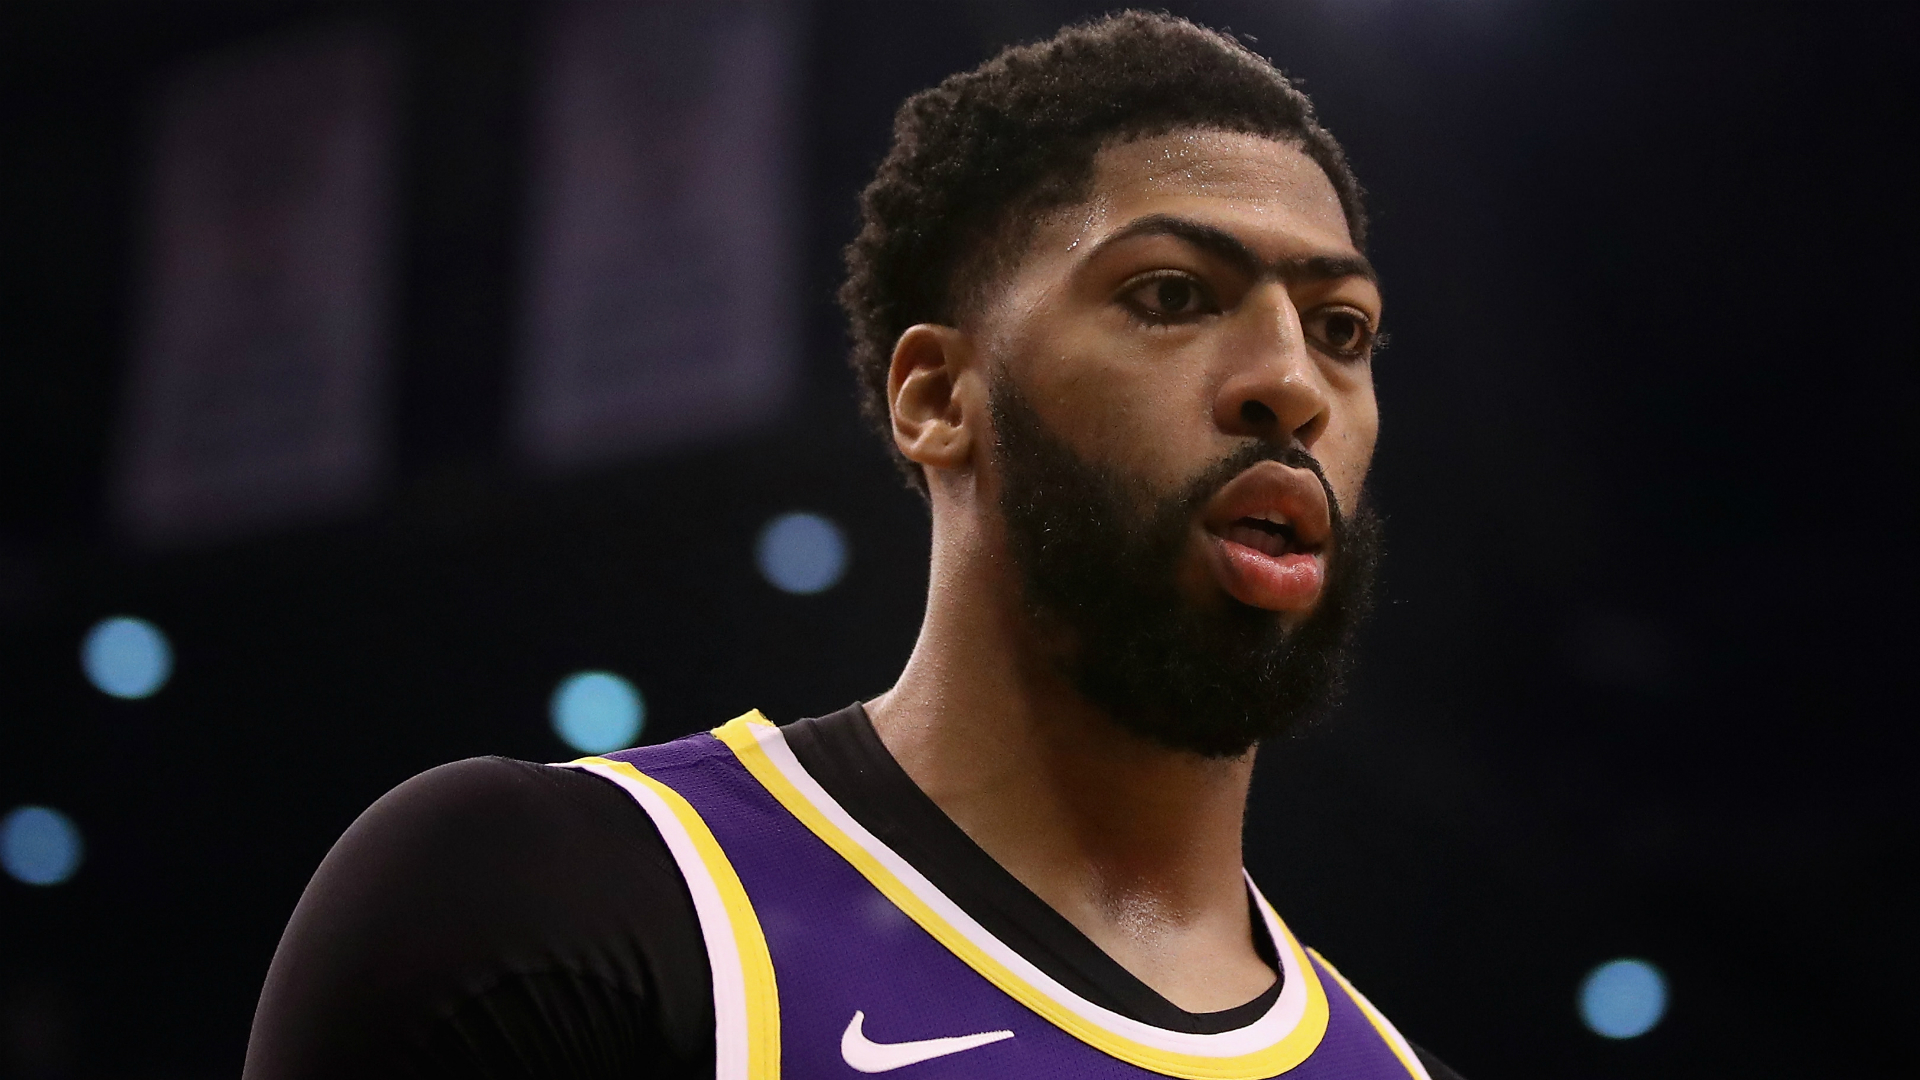 After sitting out Wednesday's game due to shoulder and rib soreness, Anthony Davis is set to face the Sacramento Kings.